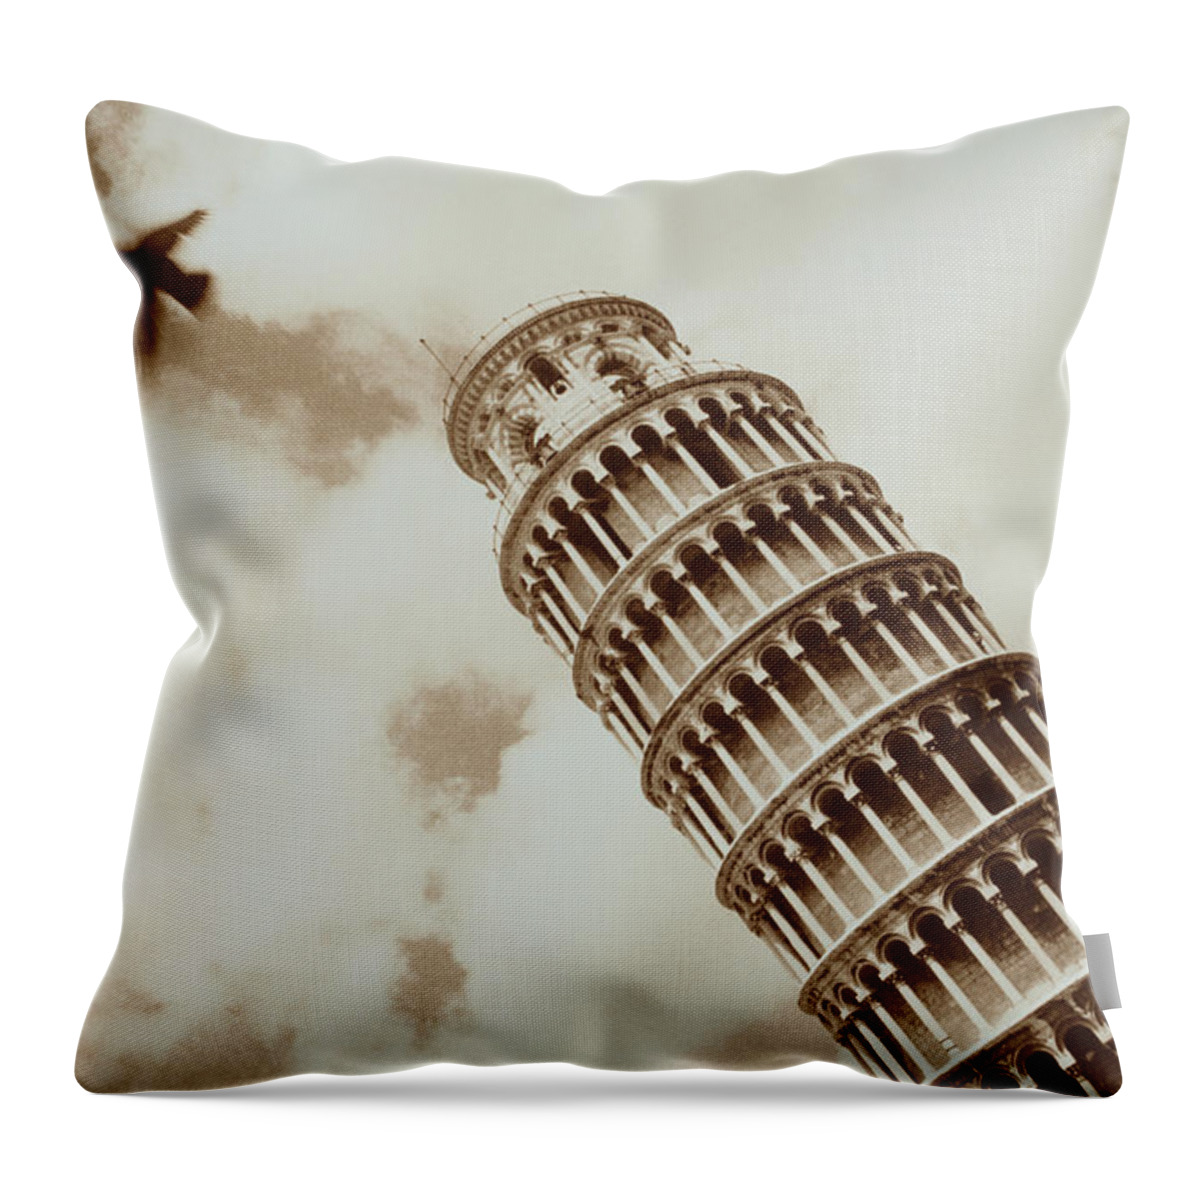 One Animal Throw Pillow featuring the photograph Bird And Leaning Tower Of Pisa by Kritina Lee Knief